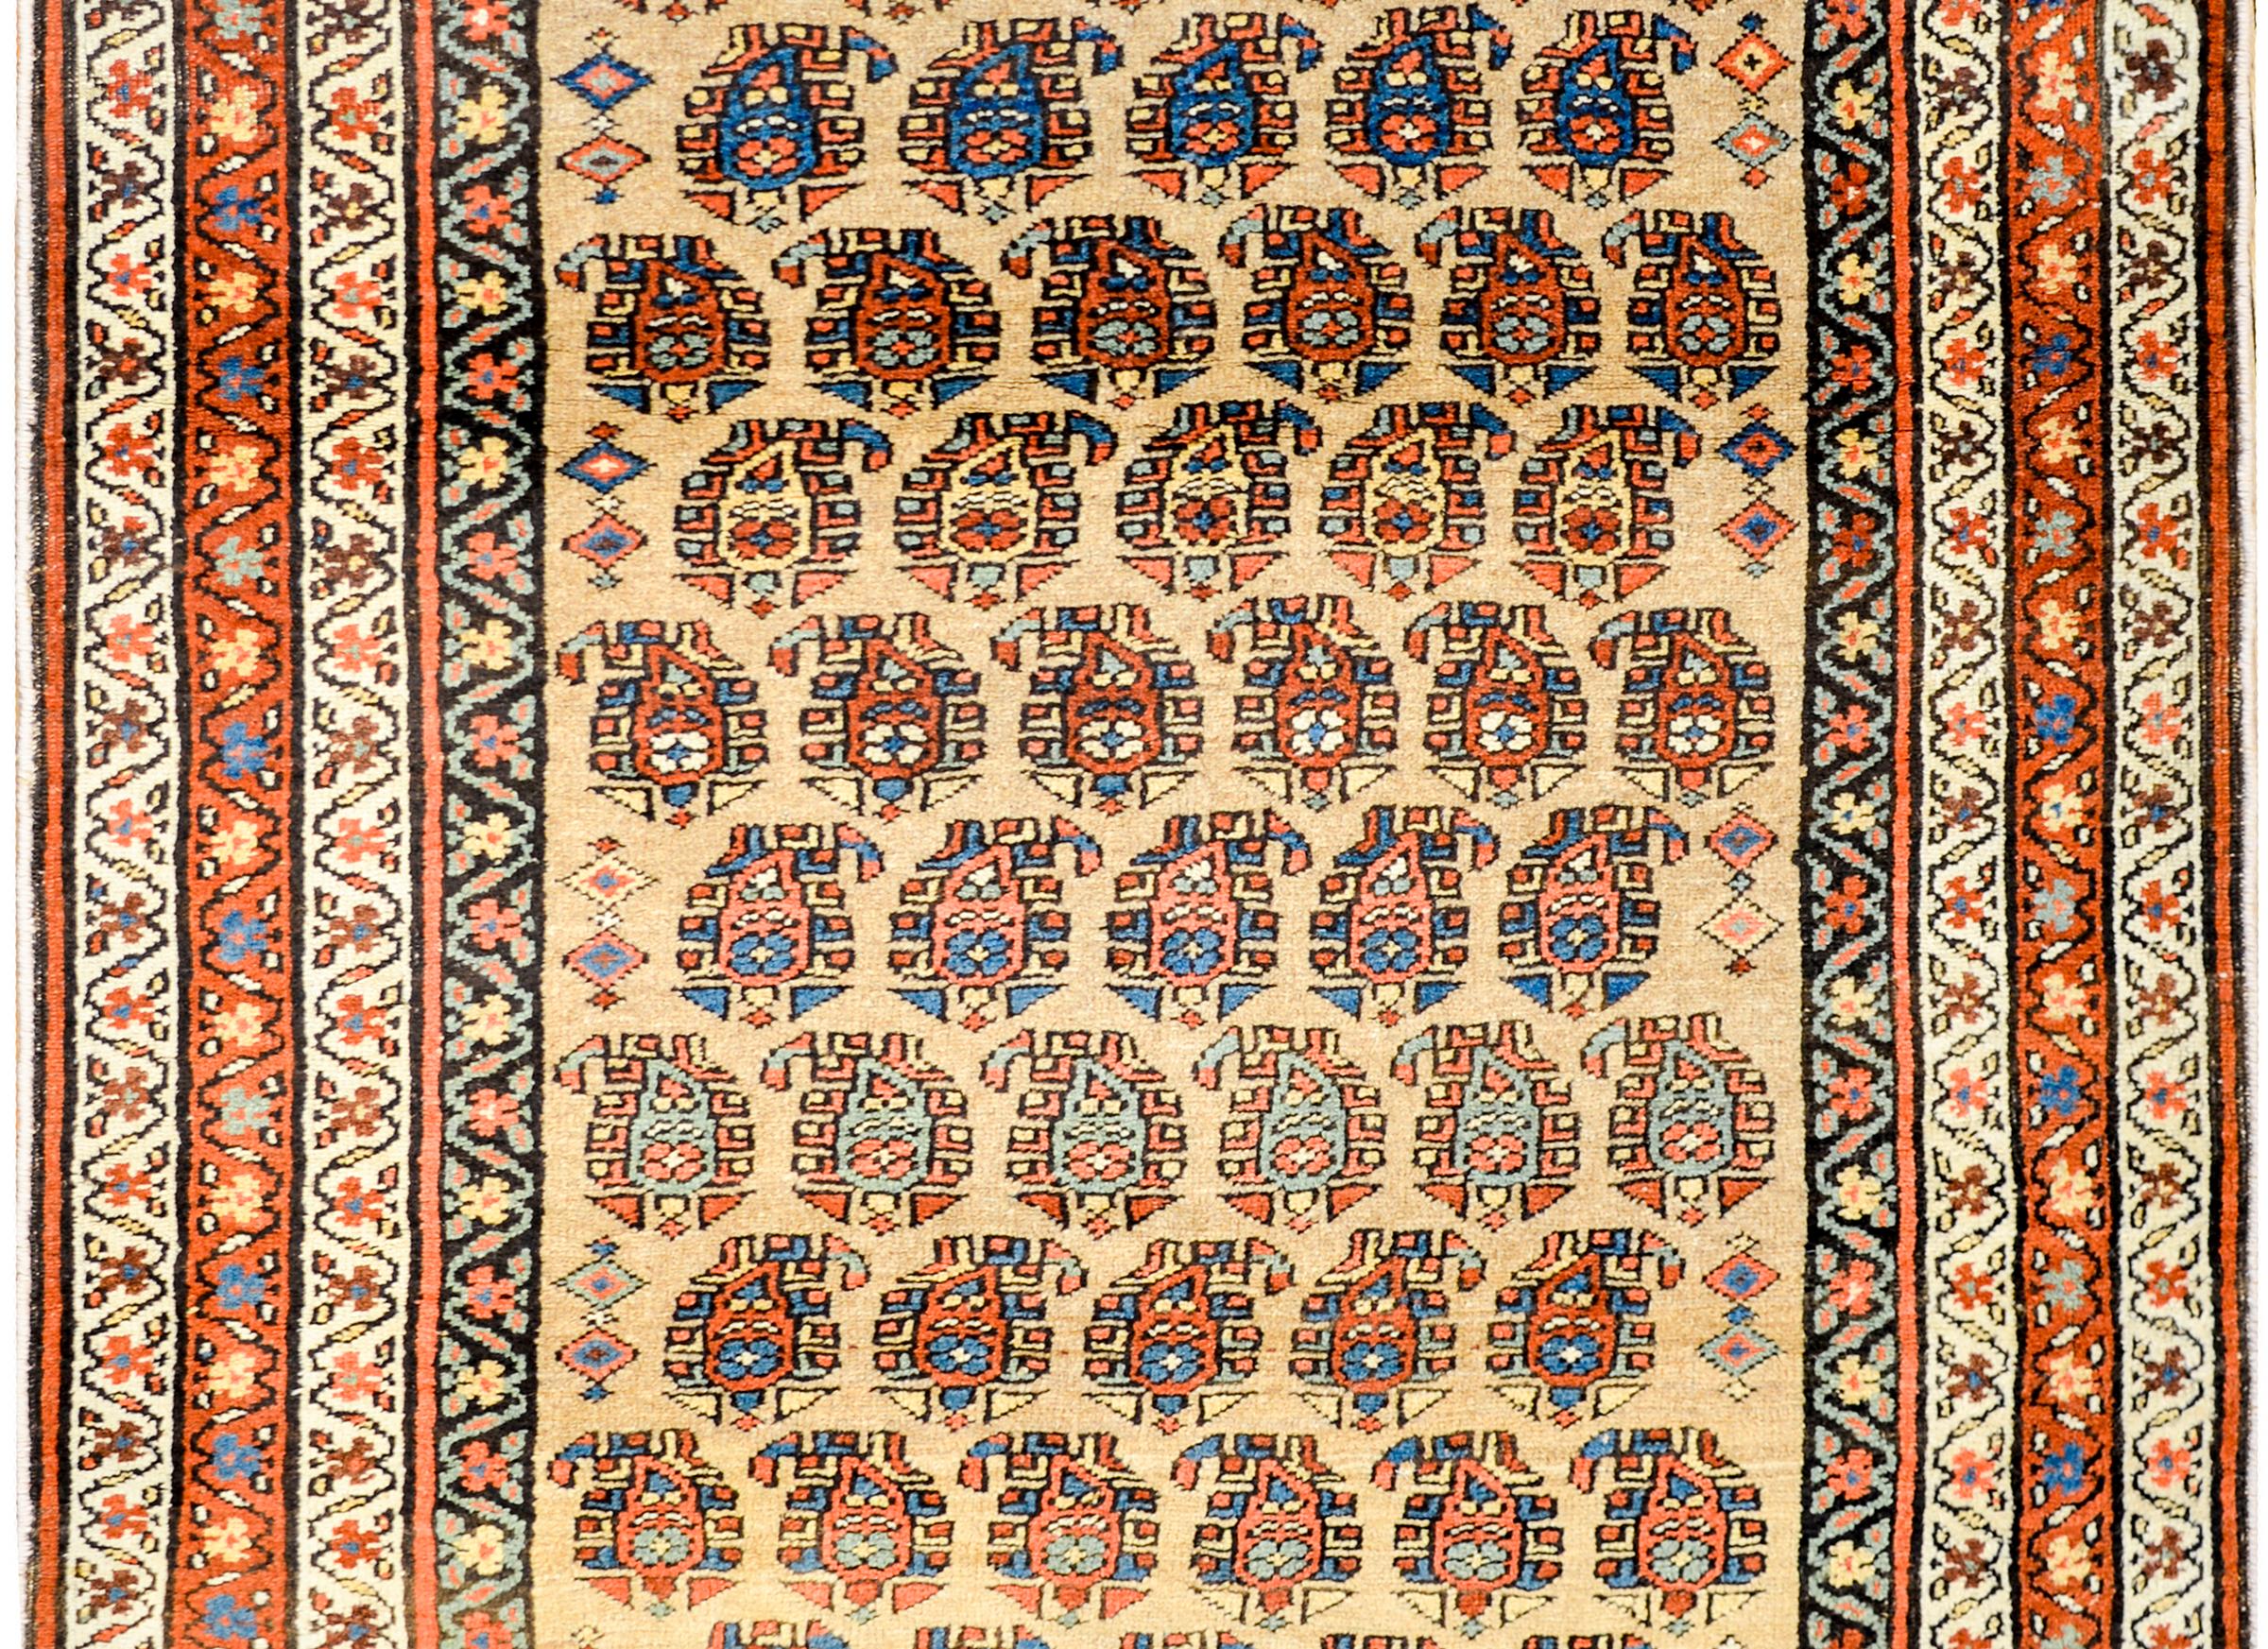 A gorgeous early 20th century Persian Bidjar rug with an all-over stylized paisley pattern woven in light and dark indigo, crimson, gold, and green, on a natural wool colored background. The border is sweet with four thin petite scrolling vine and